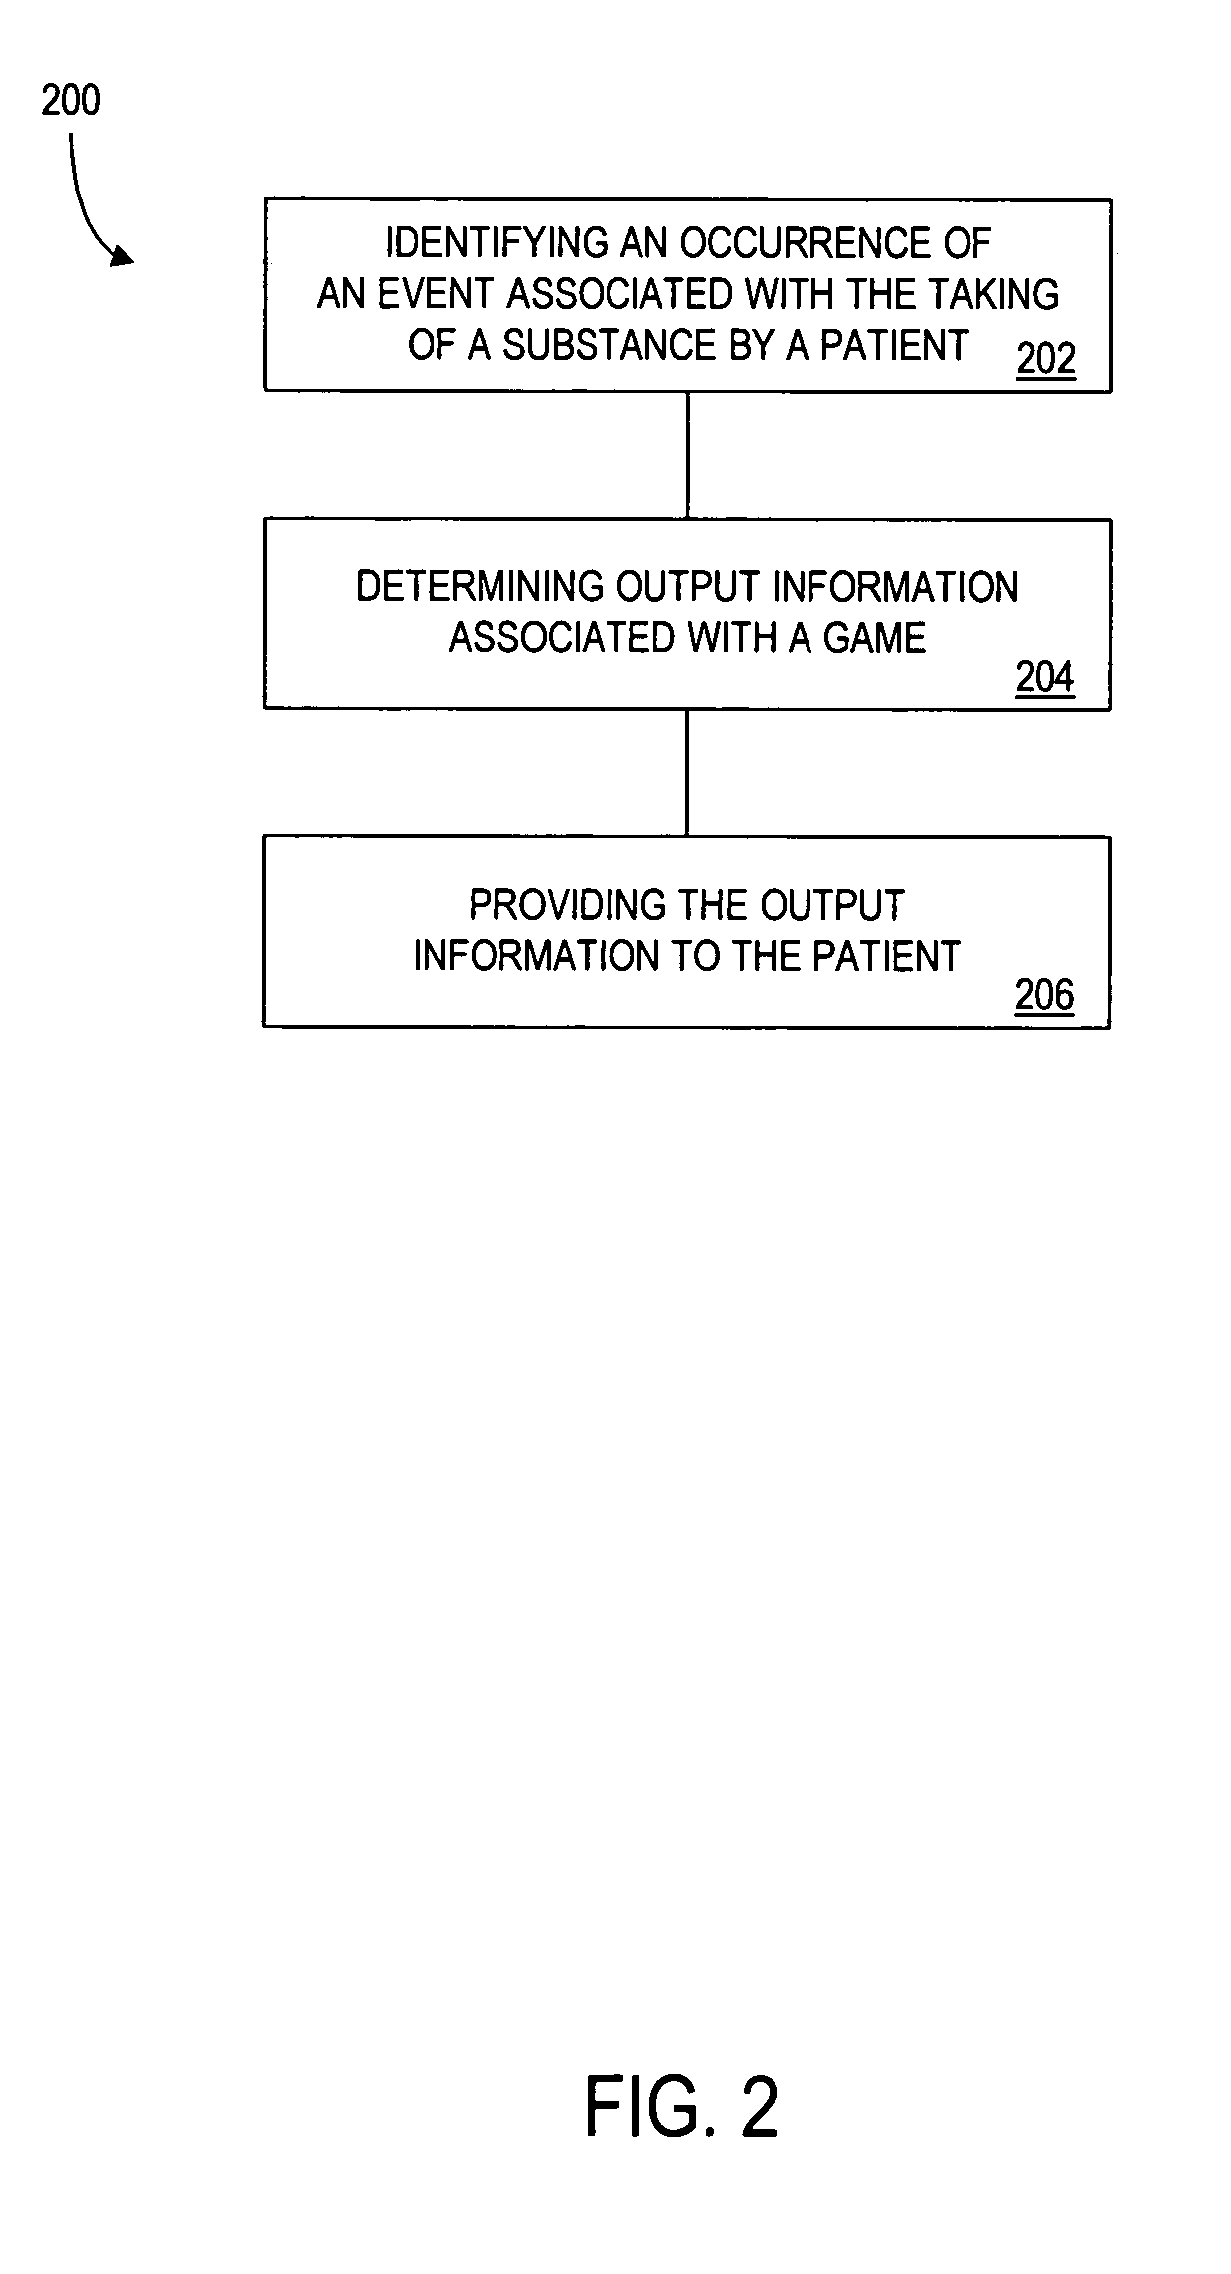 Systems and methods for improved health care compliance